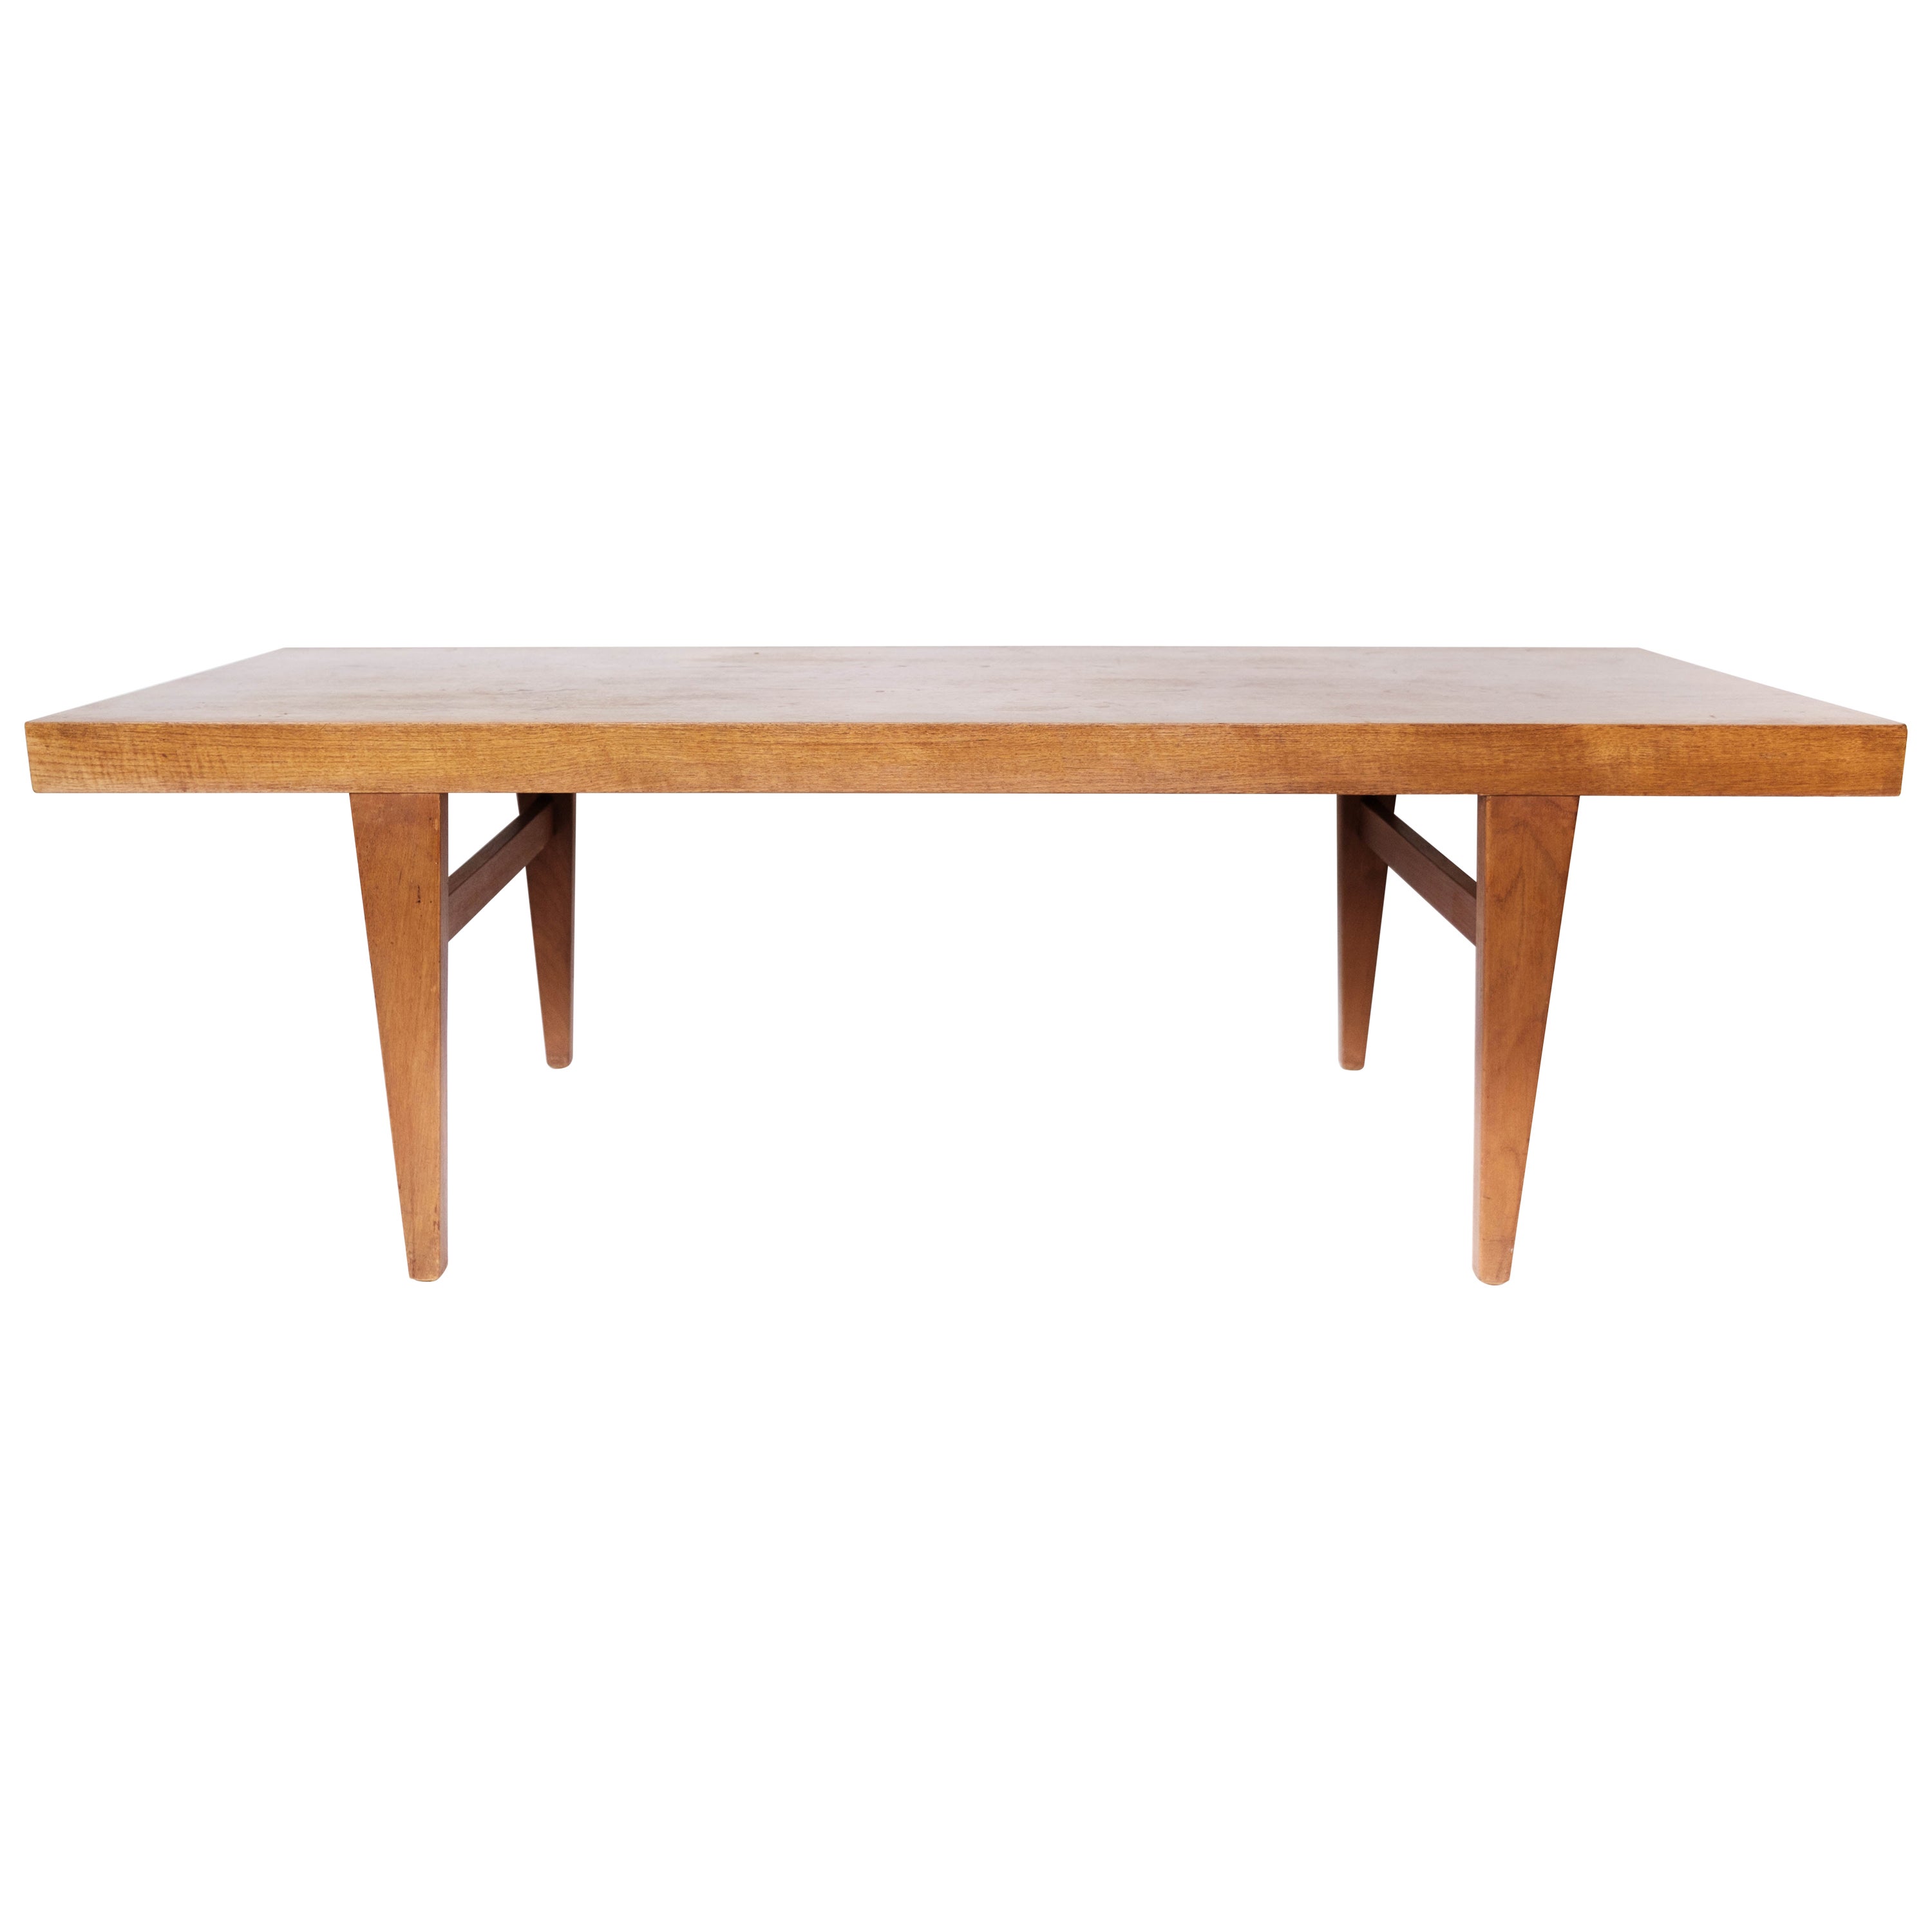 Coffee Table in Teak with Drawer, of Danish Design from the 1960s